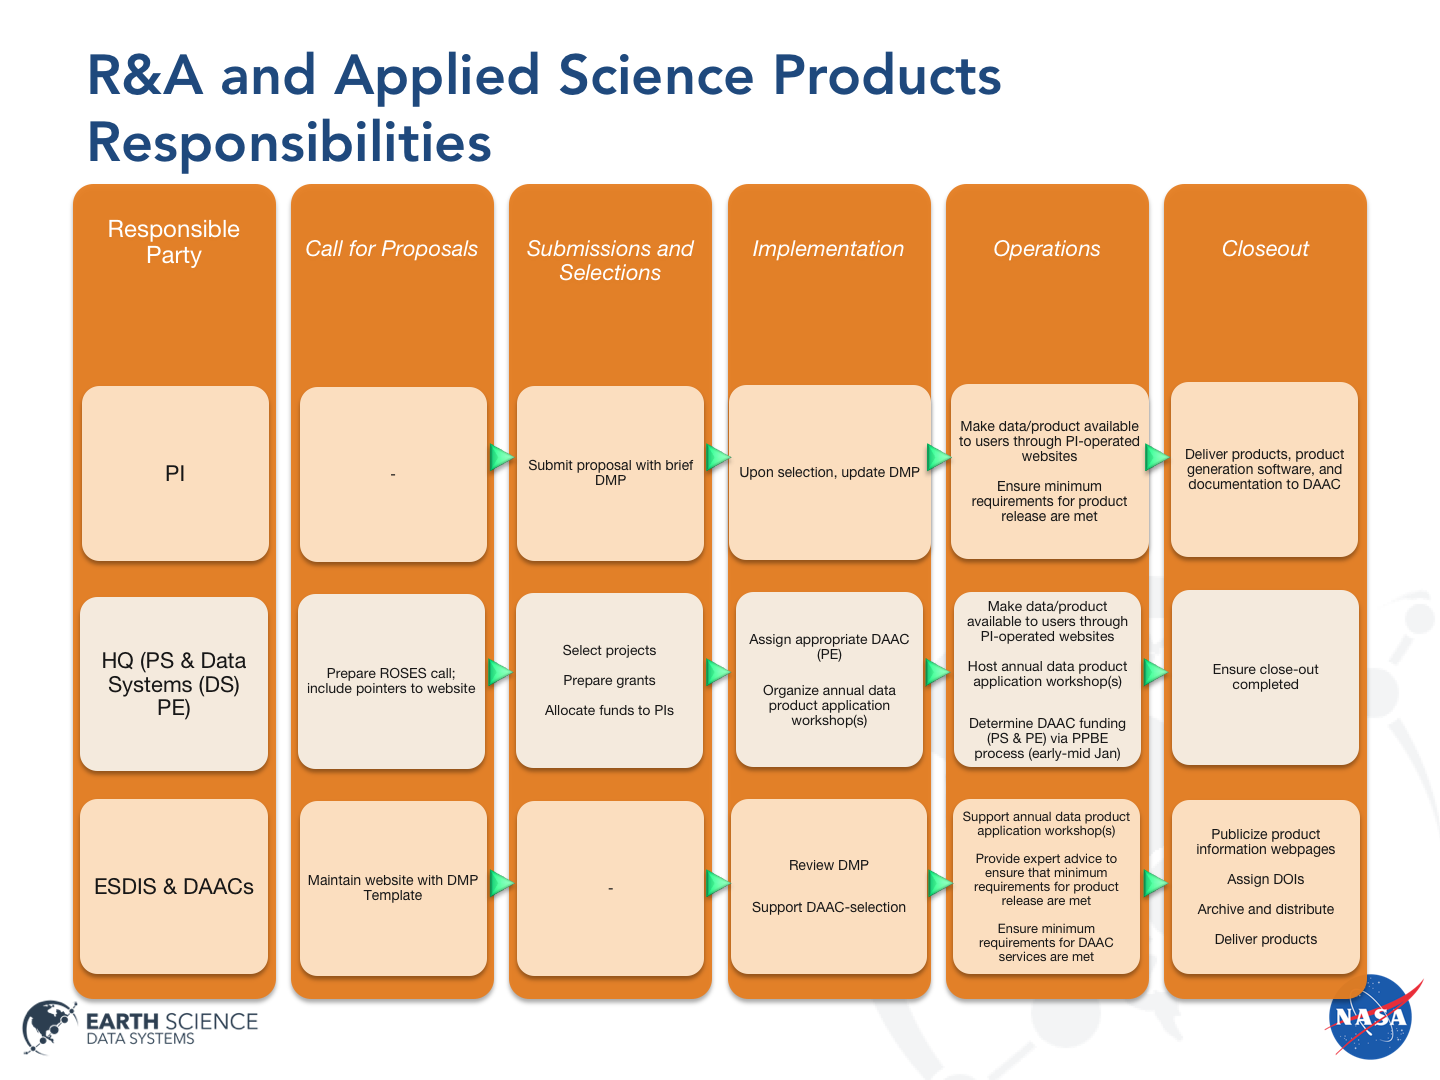 Community data: Research and Applied Sciences Requirements